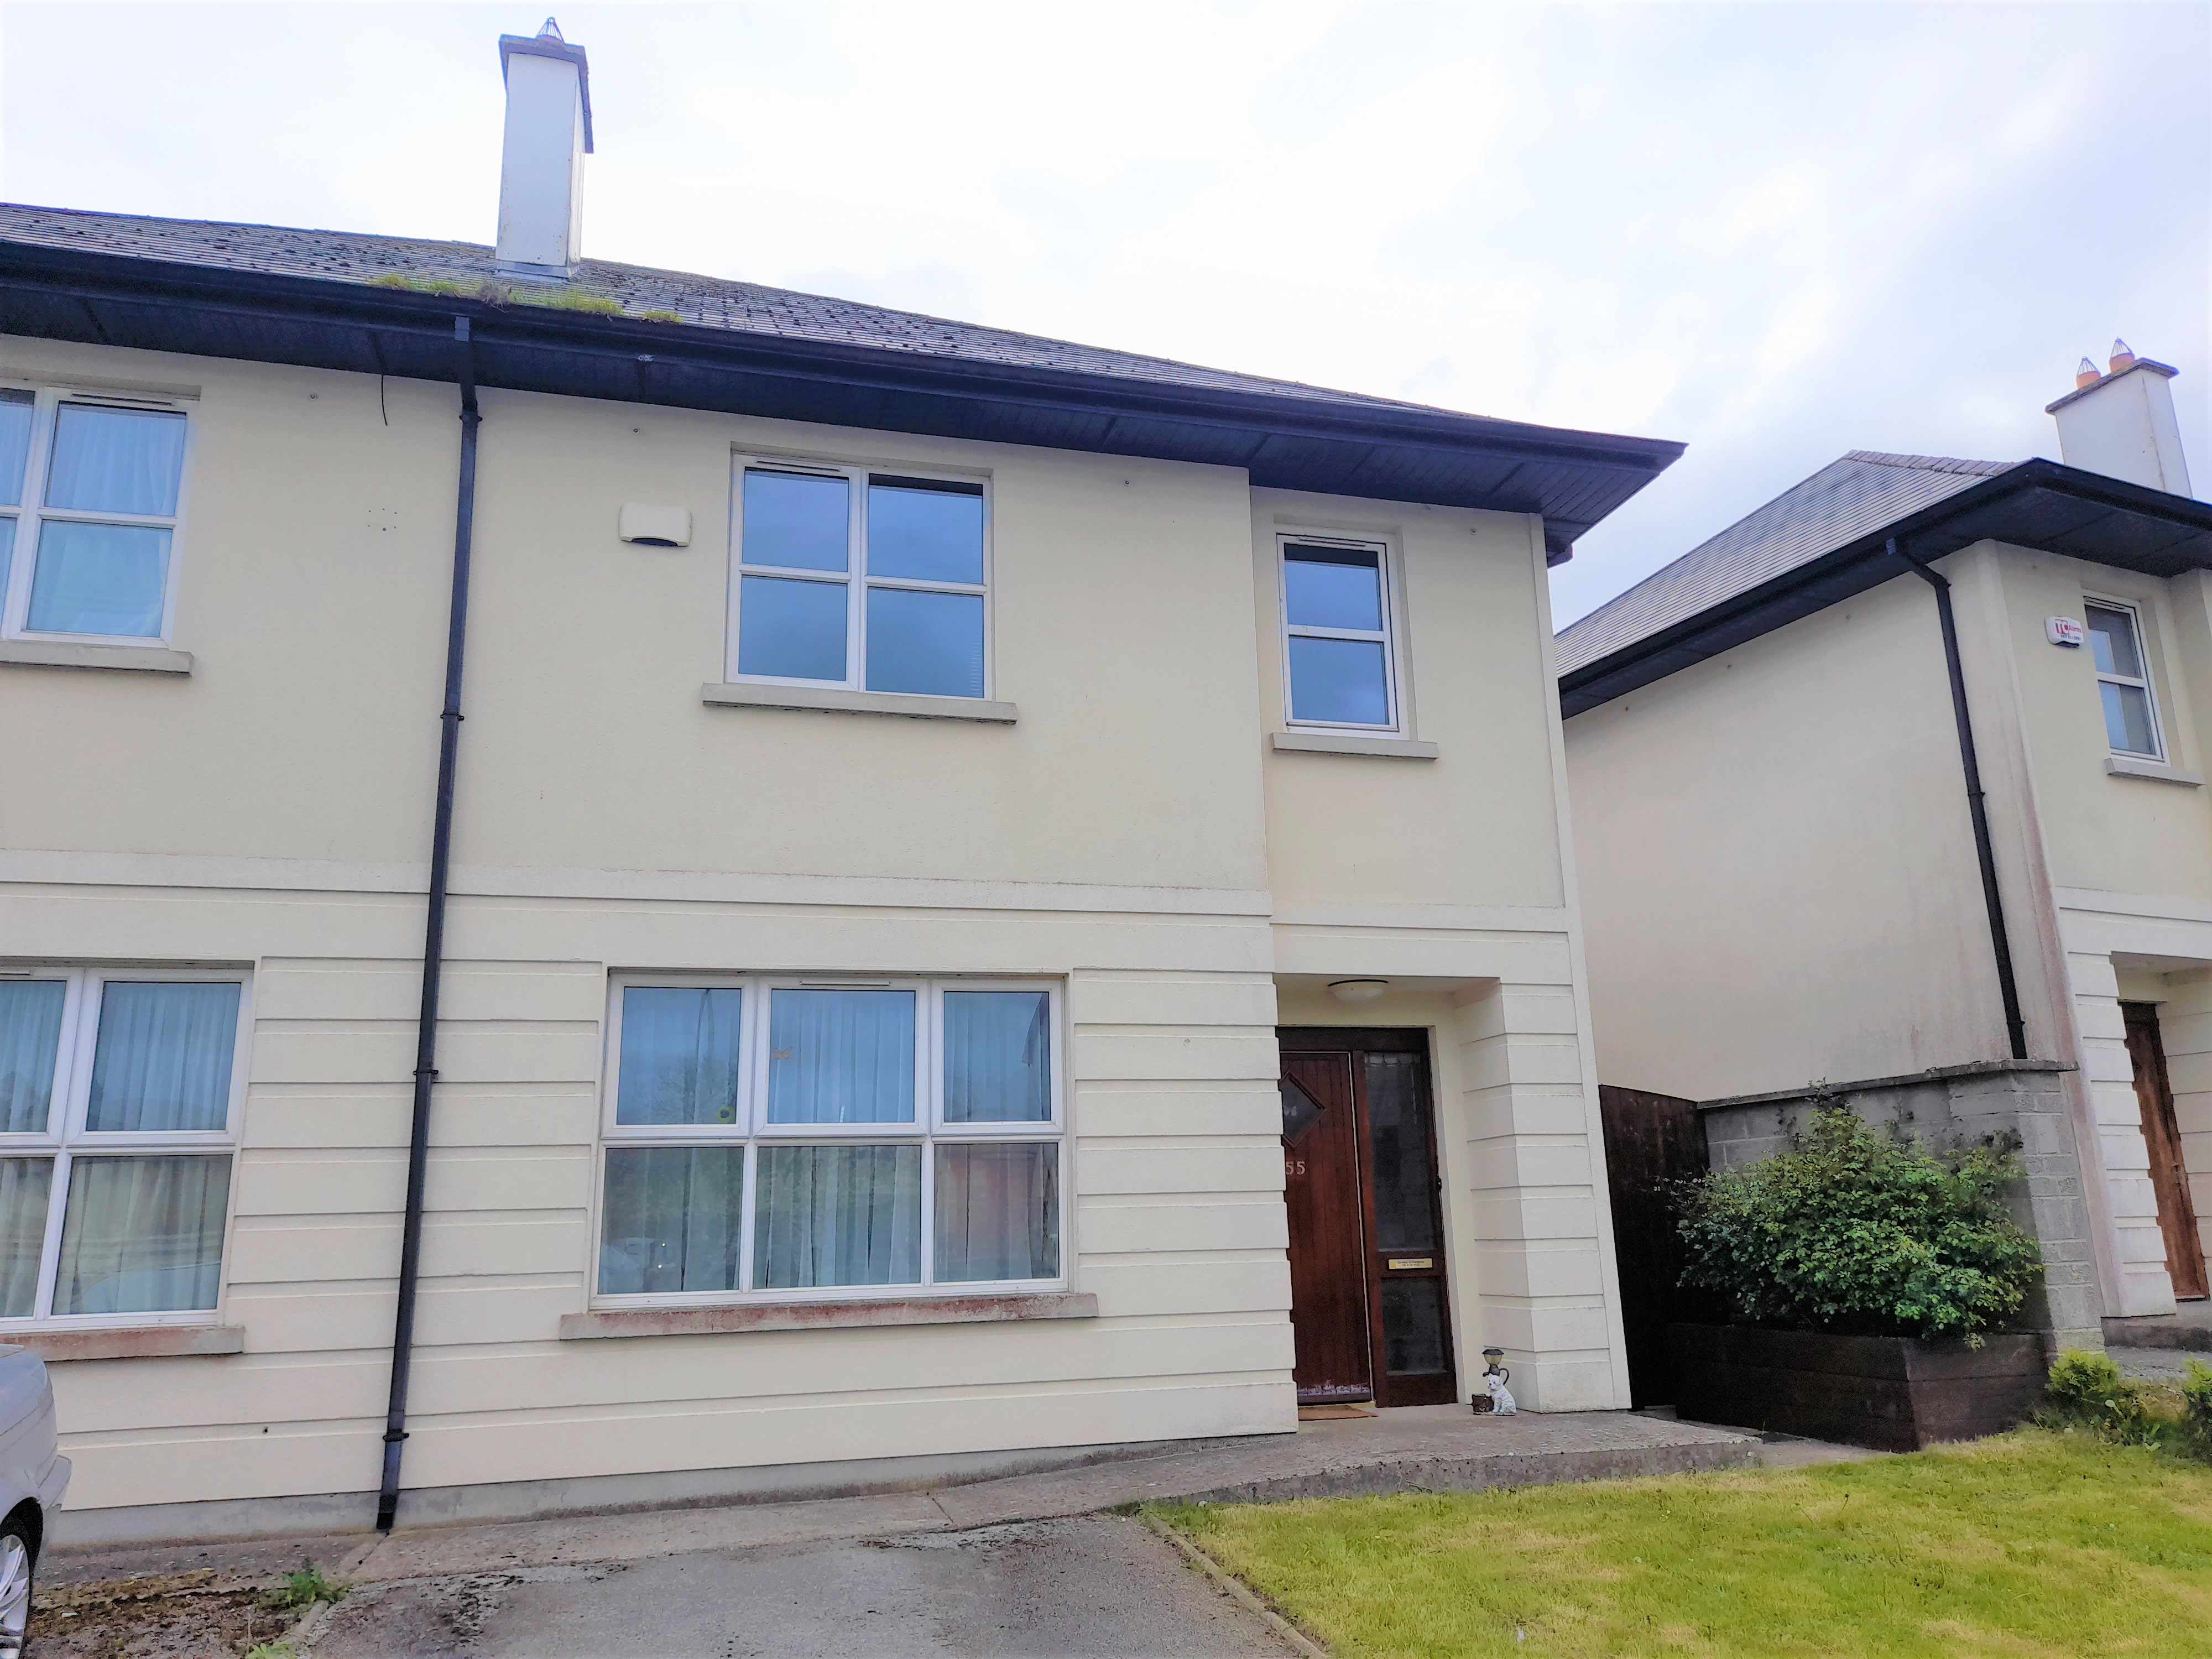 No. 55 Springfield Crescent, Rossmore Village, Tipperary Town E34 Y957